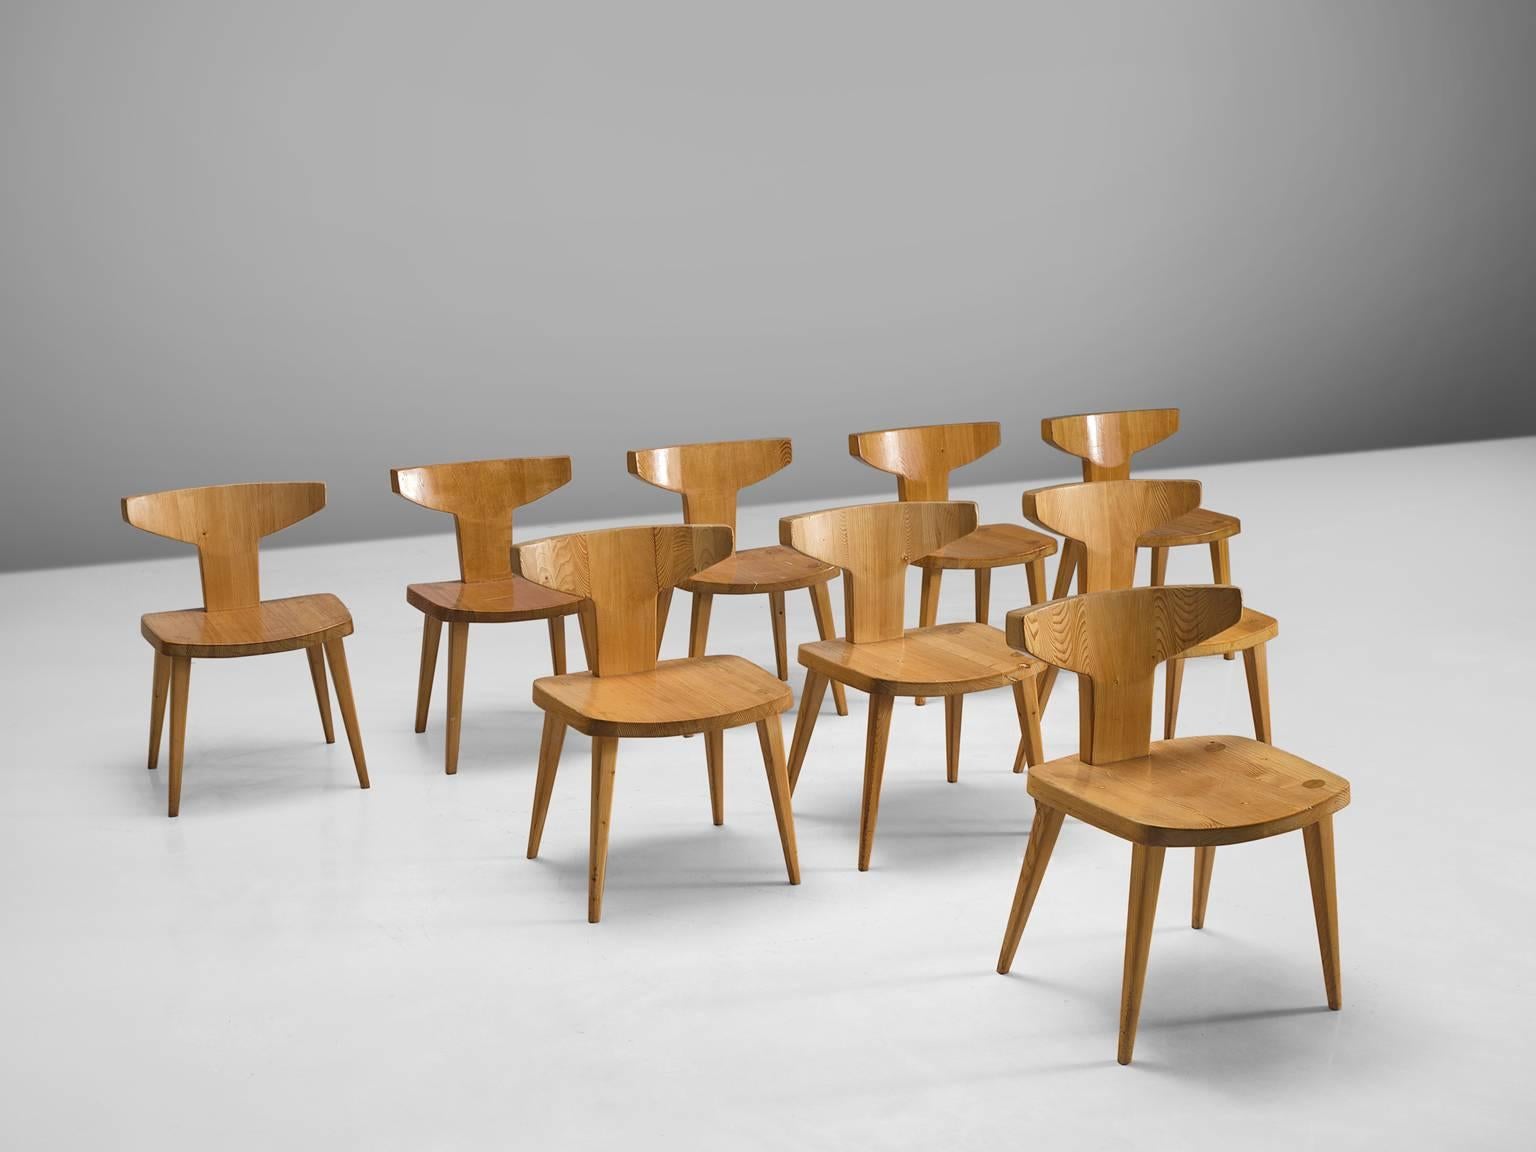 Jacob Kielland-Brandt, nine dining chairs, solid pine, Denmark, 1960s.

This remarkable set holds a strong expression and this organic shaped design is in well contrast with the solid high tapered legs which provides an open elegant look. The set